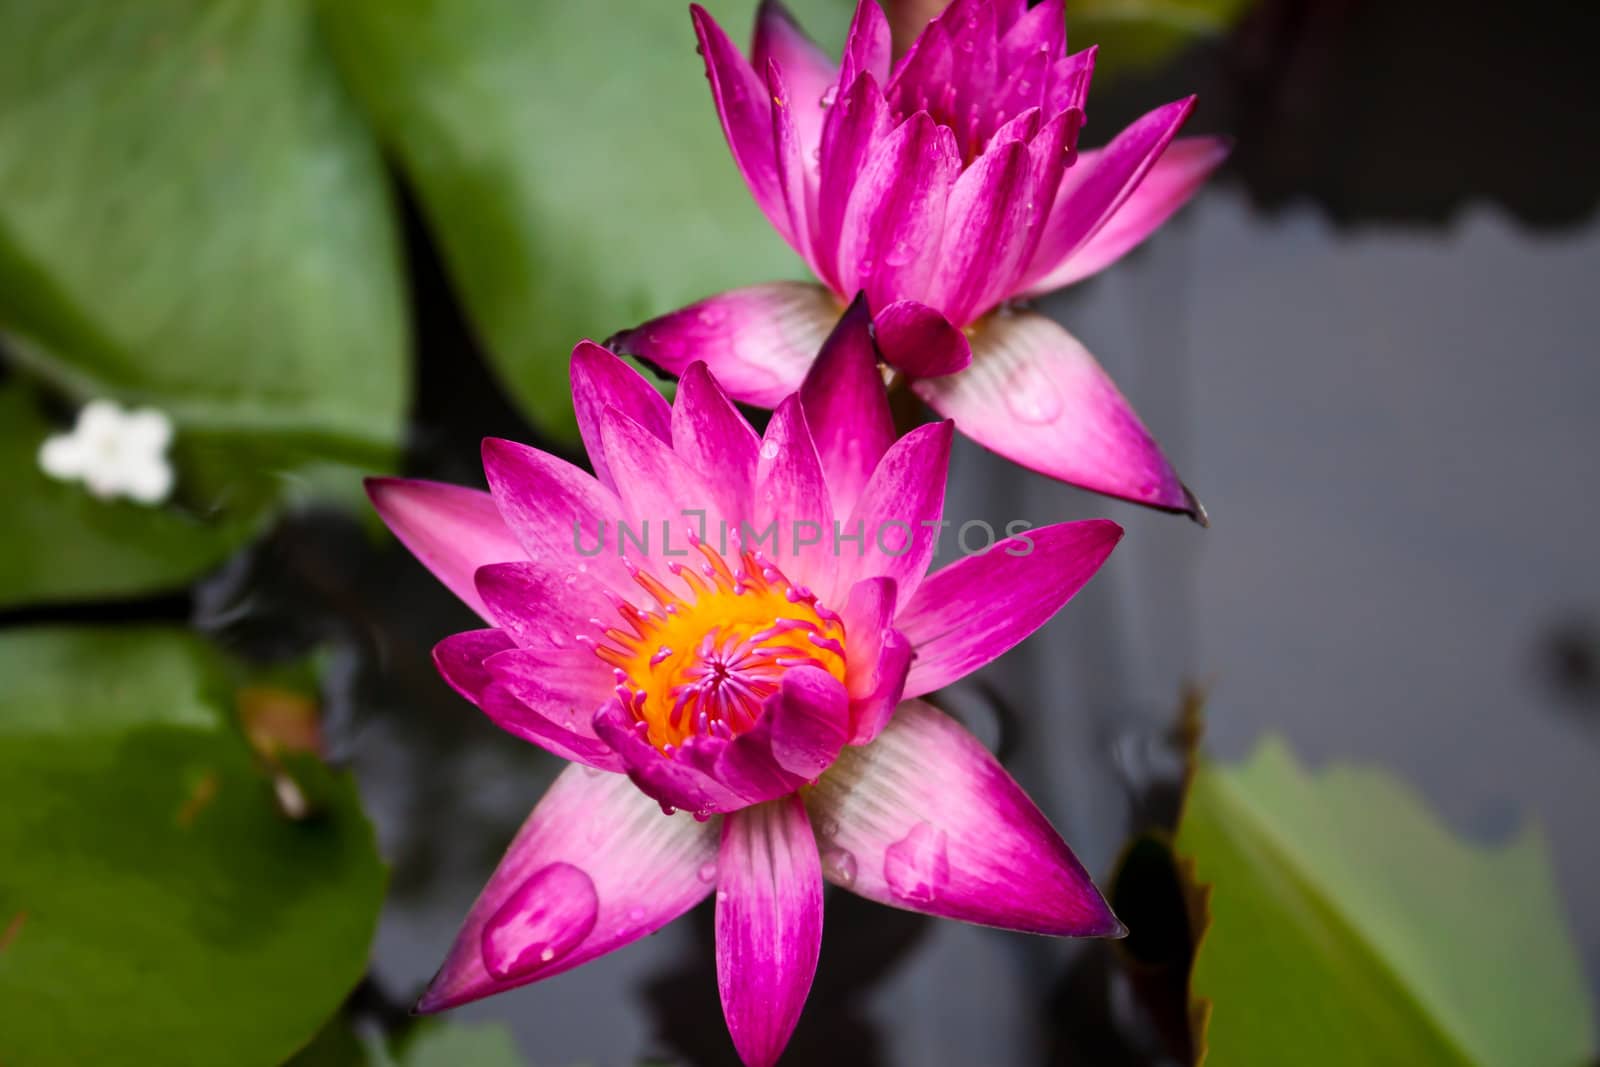 pink water lily and leaf in pond